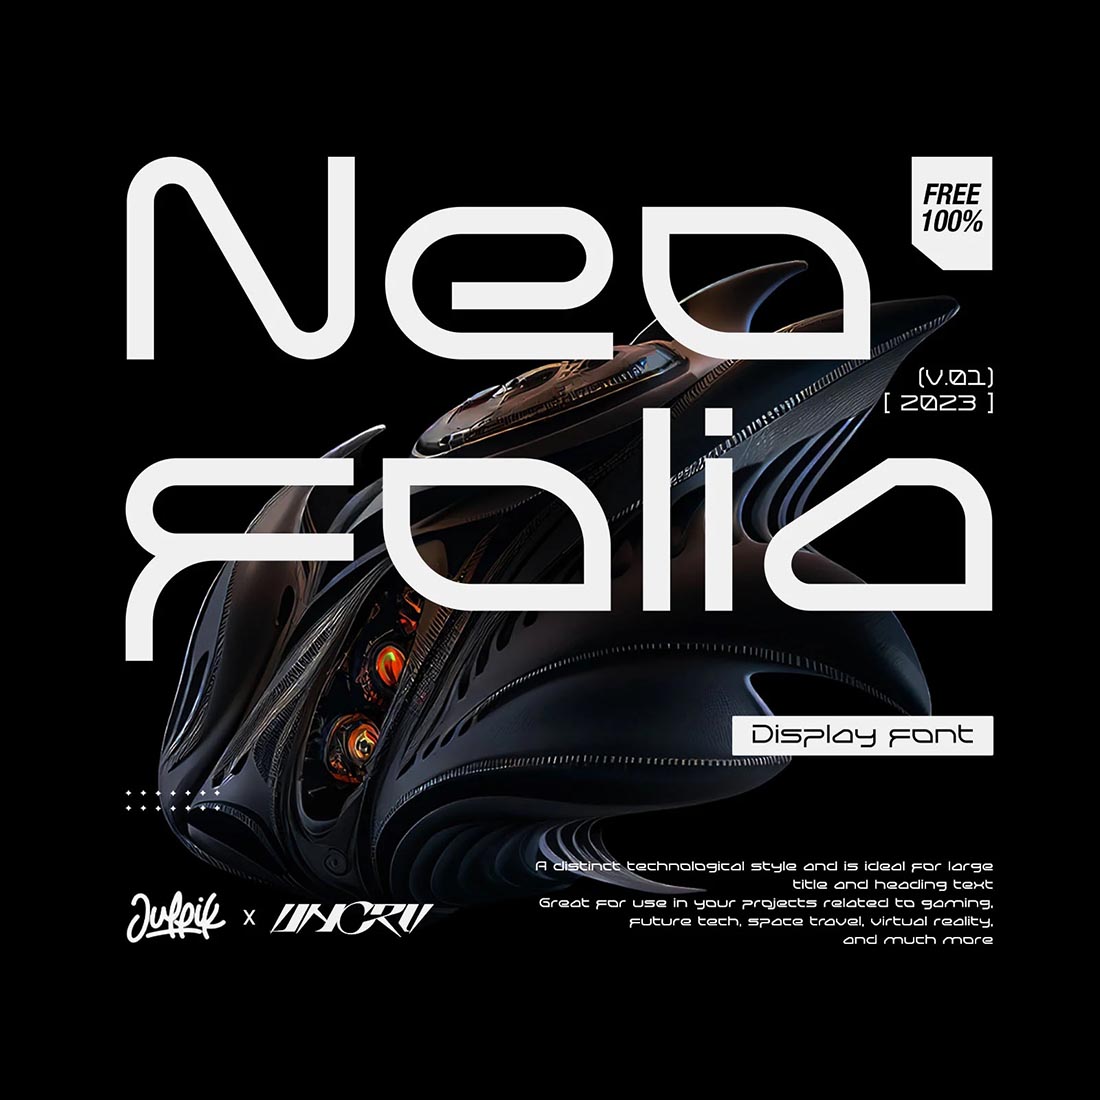 Neofolia - Display Font cover image.